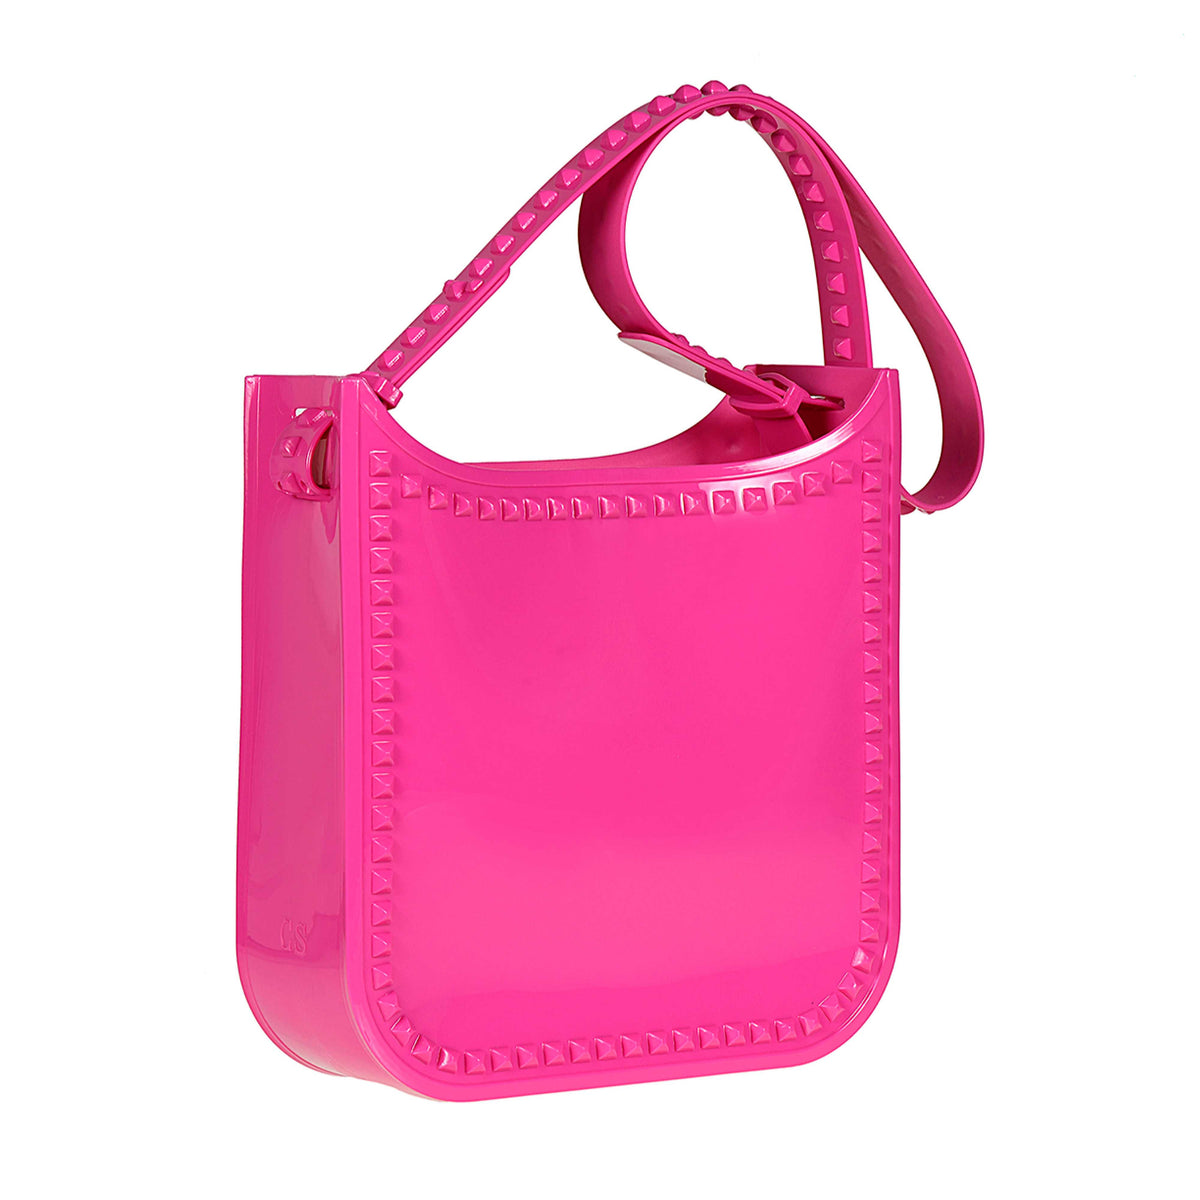 tote bag large in color fuchsia with adjustable straps